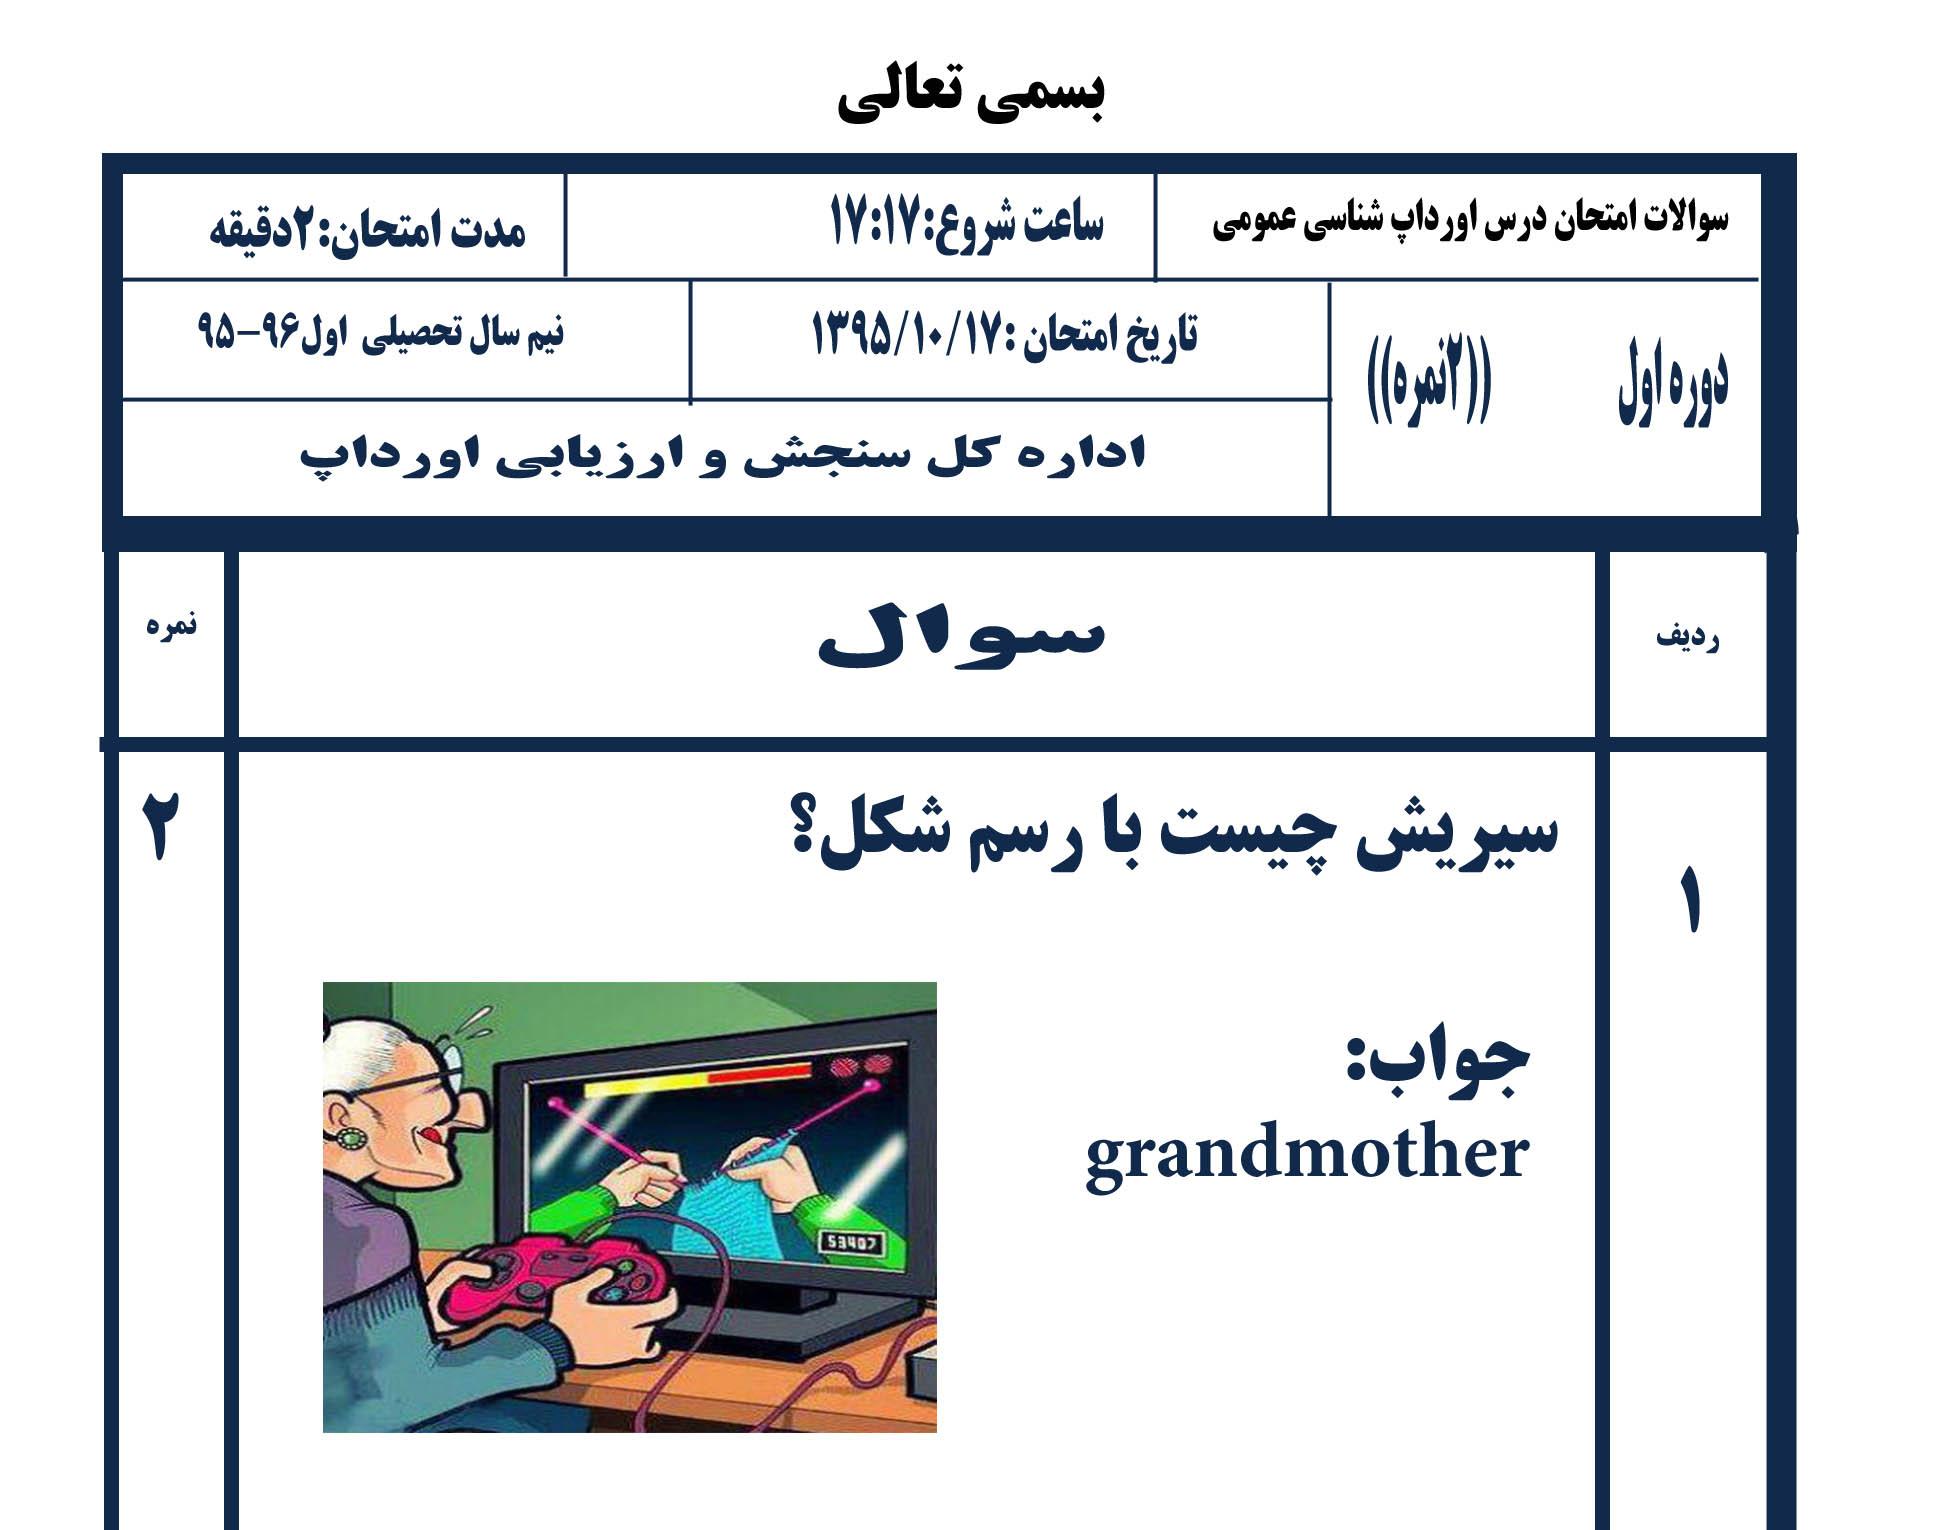 158626 Grand mother